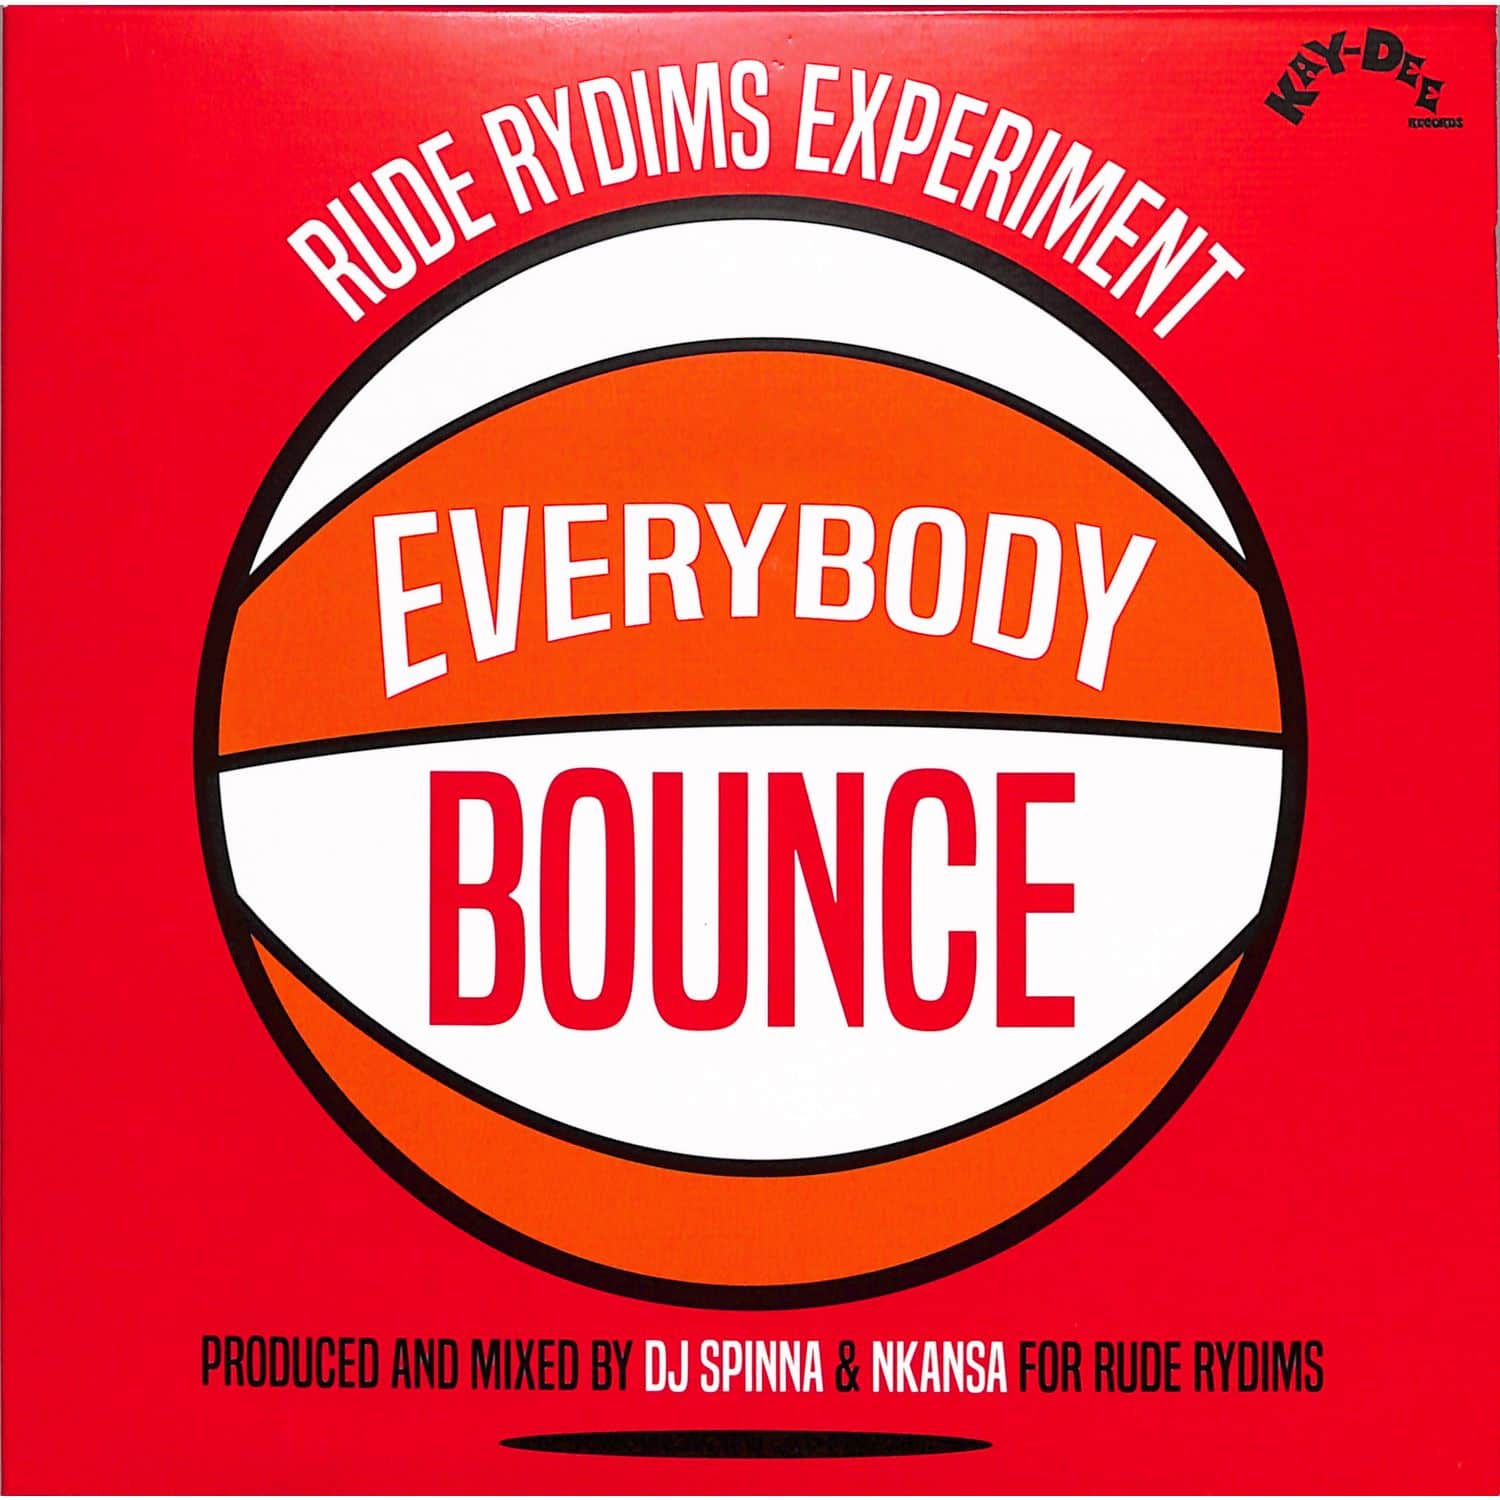 Rude Rydims Experiment - EVERYBODY BOUNCE 